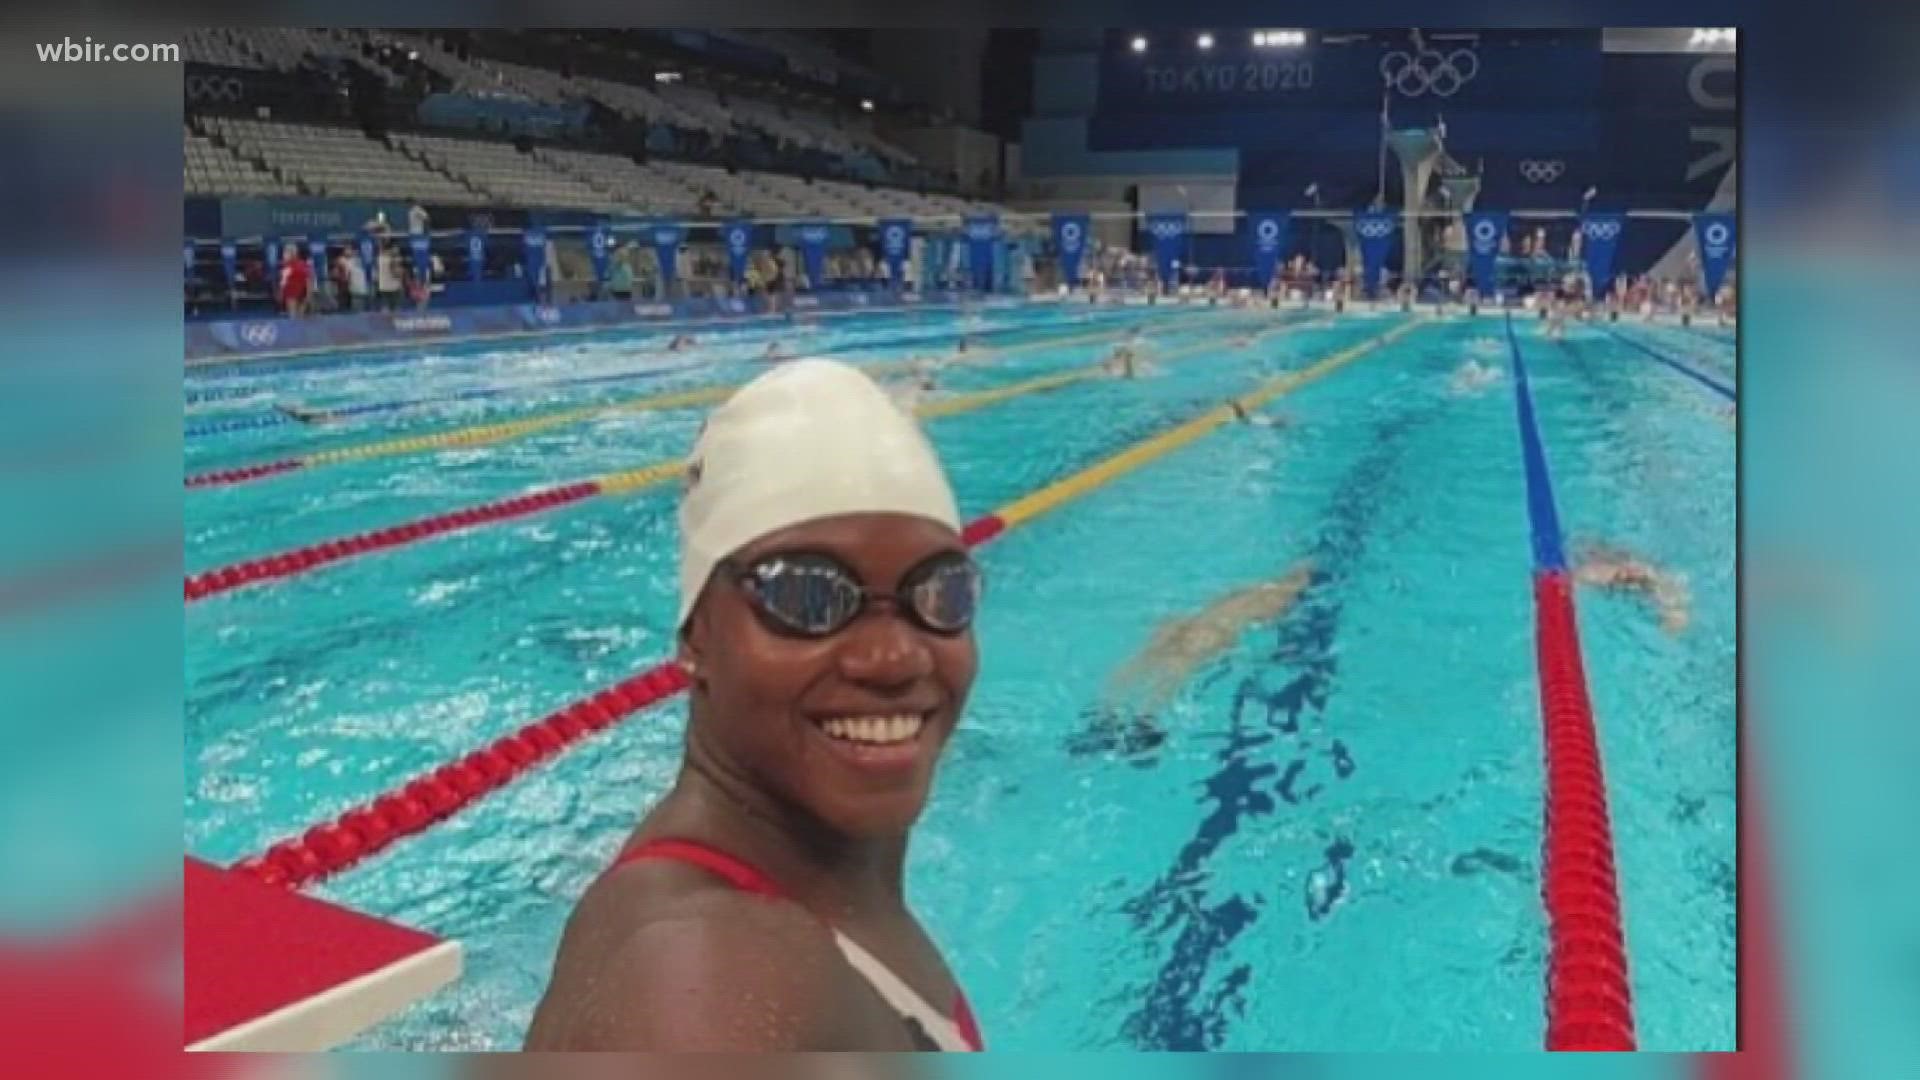 Thompson said that she is racing for her home country -- Trinidad and Tobago.